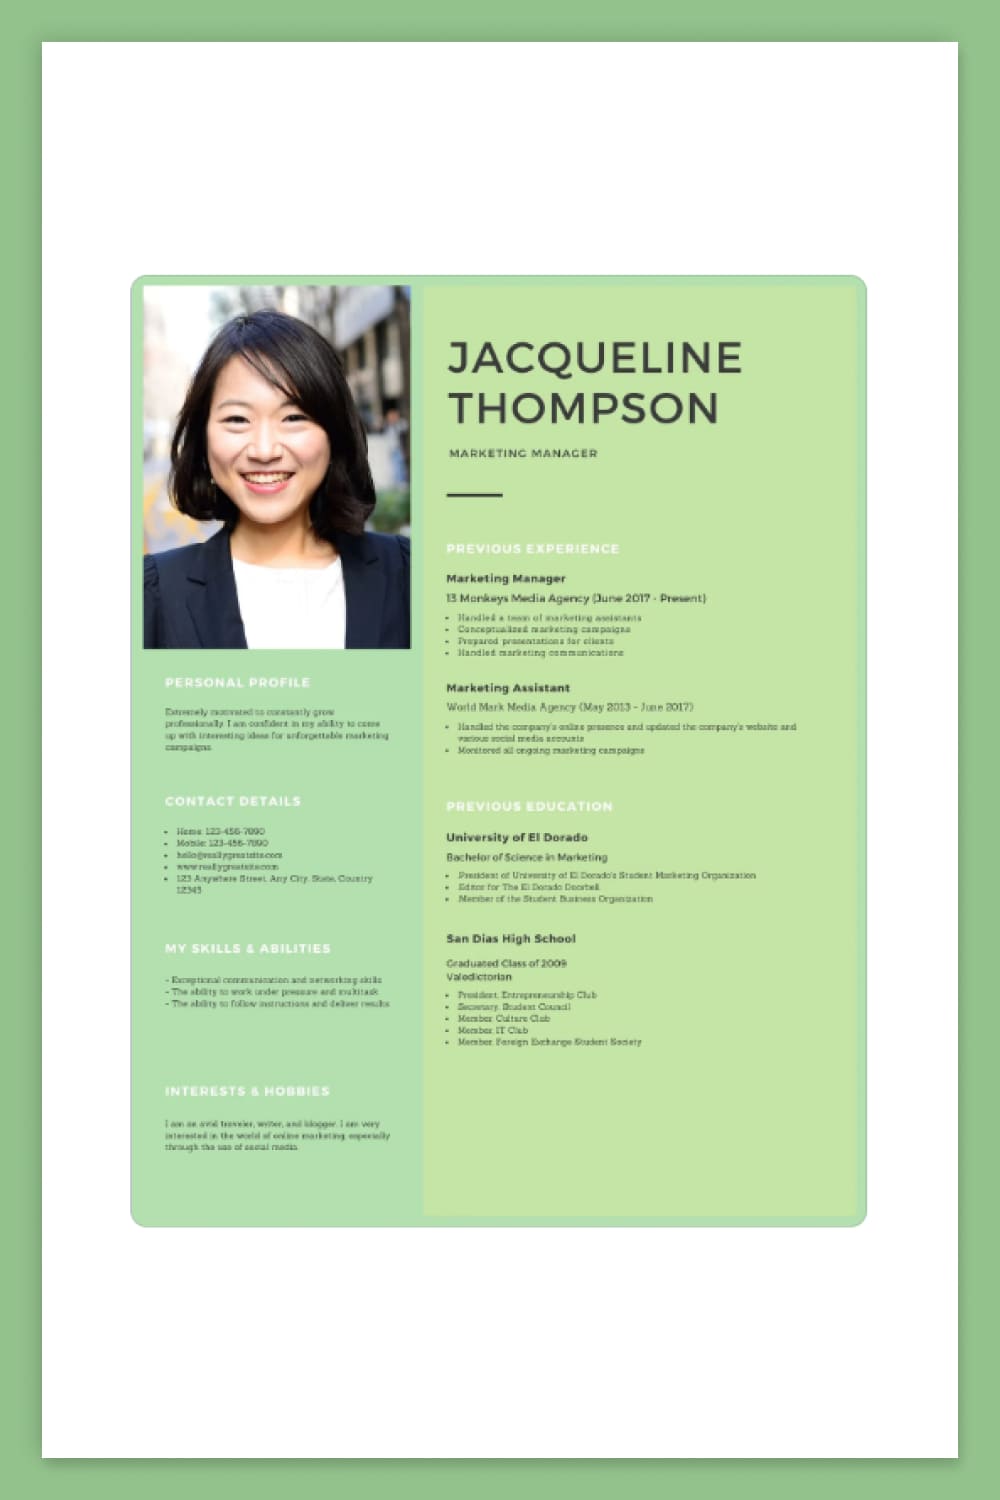 Two-column resume with a green background and a large photo of the applicant.